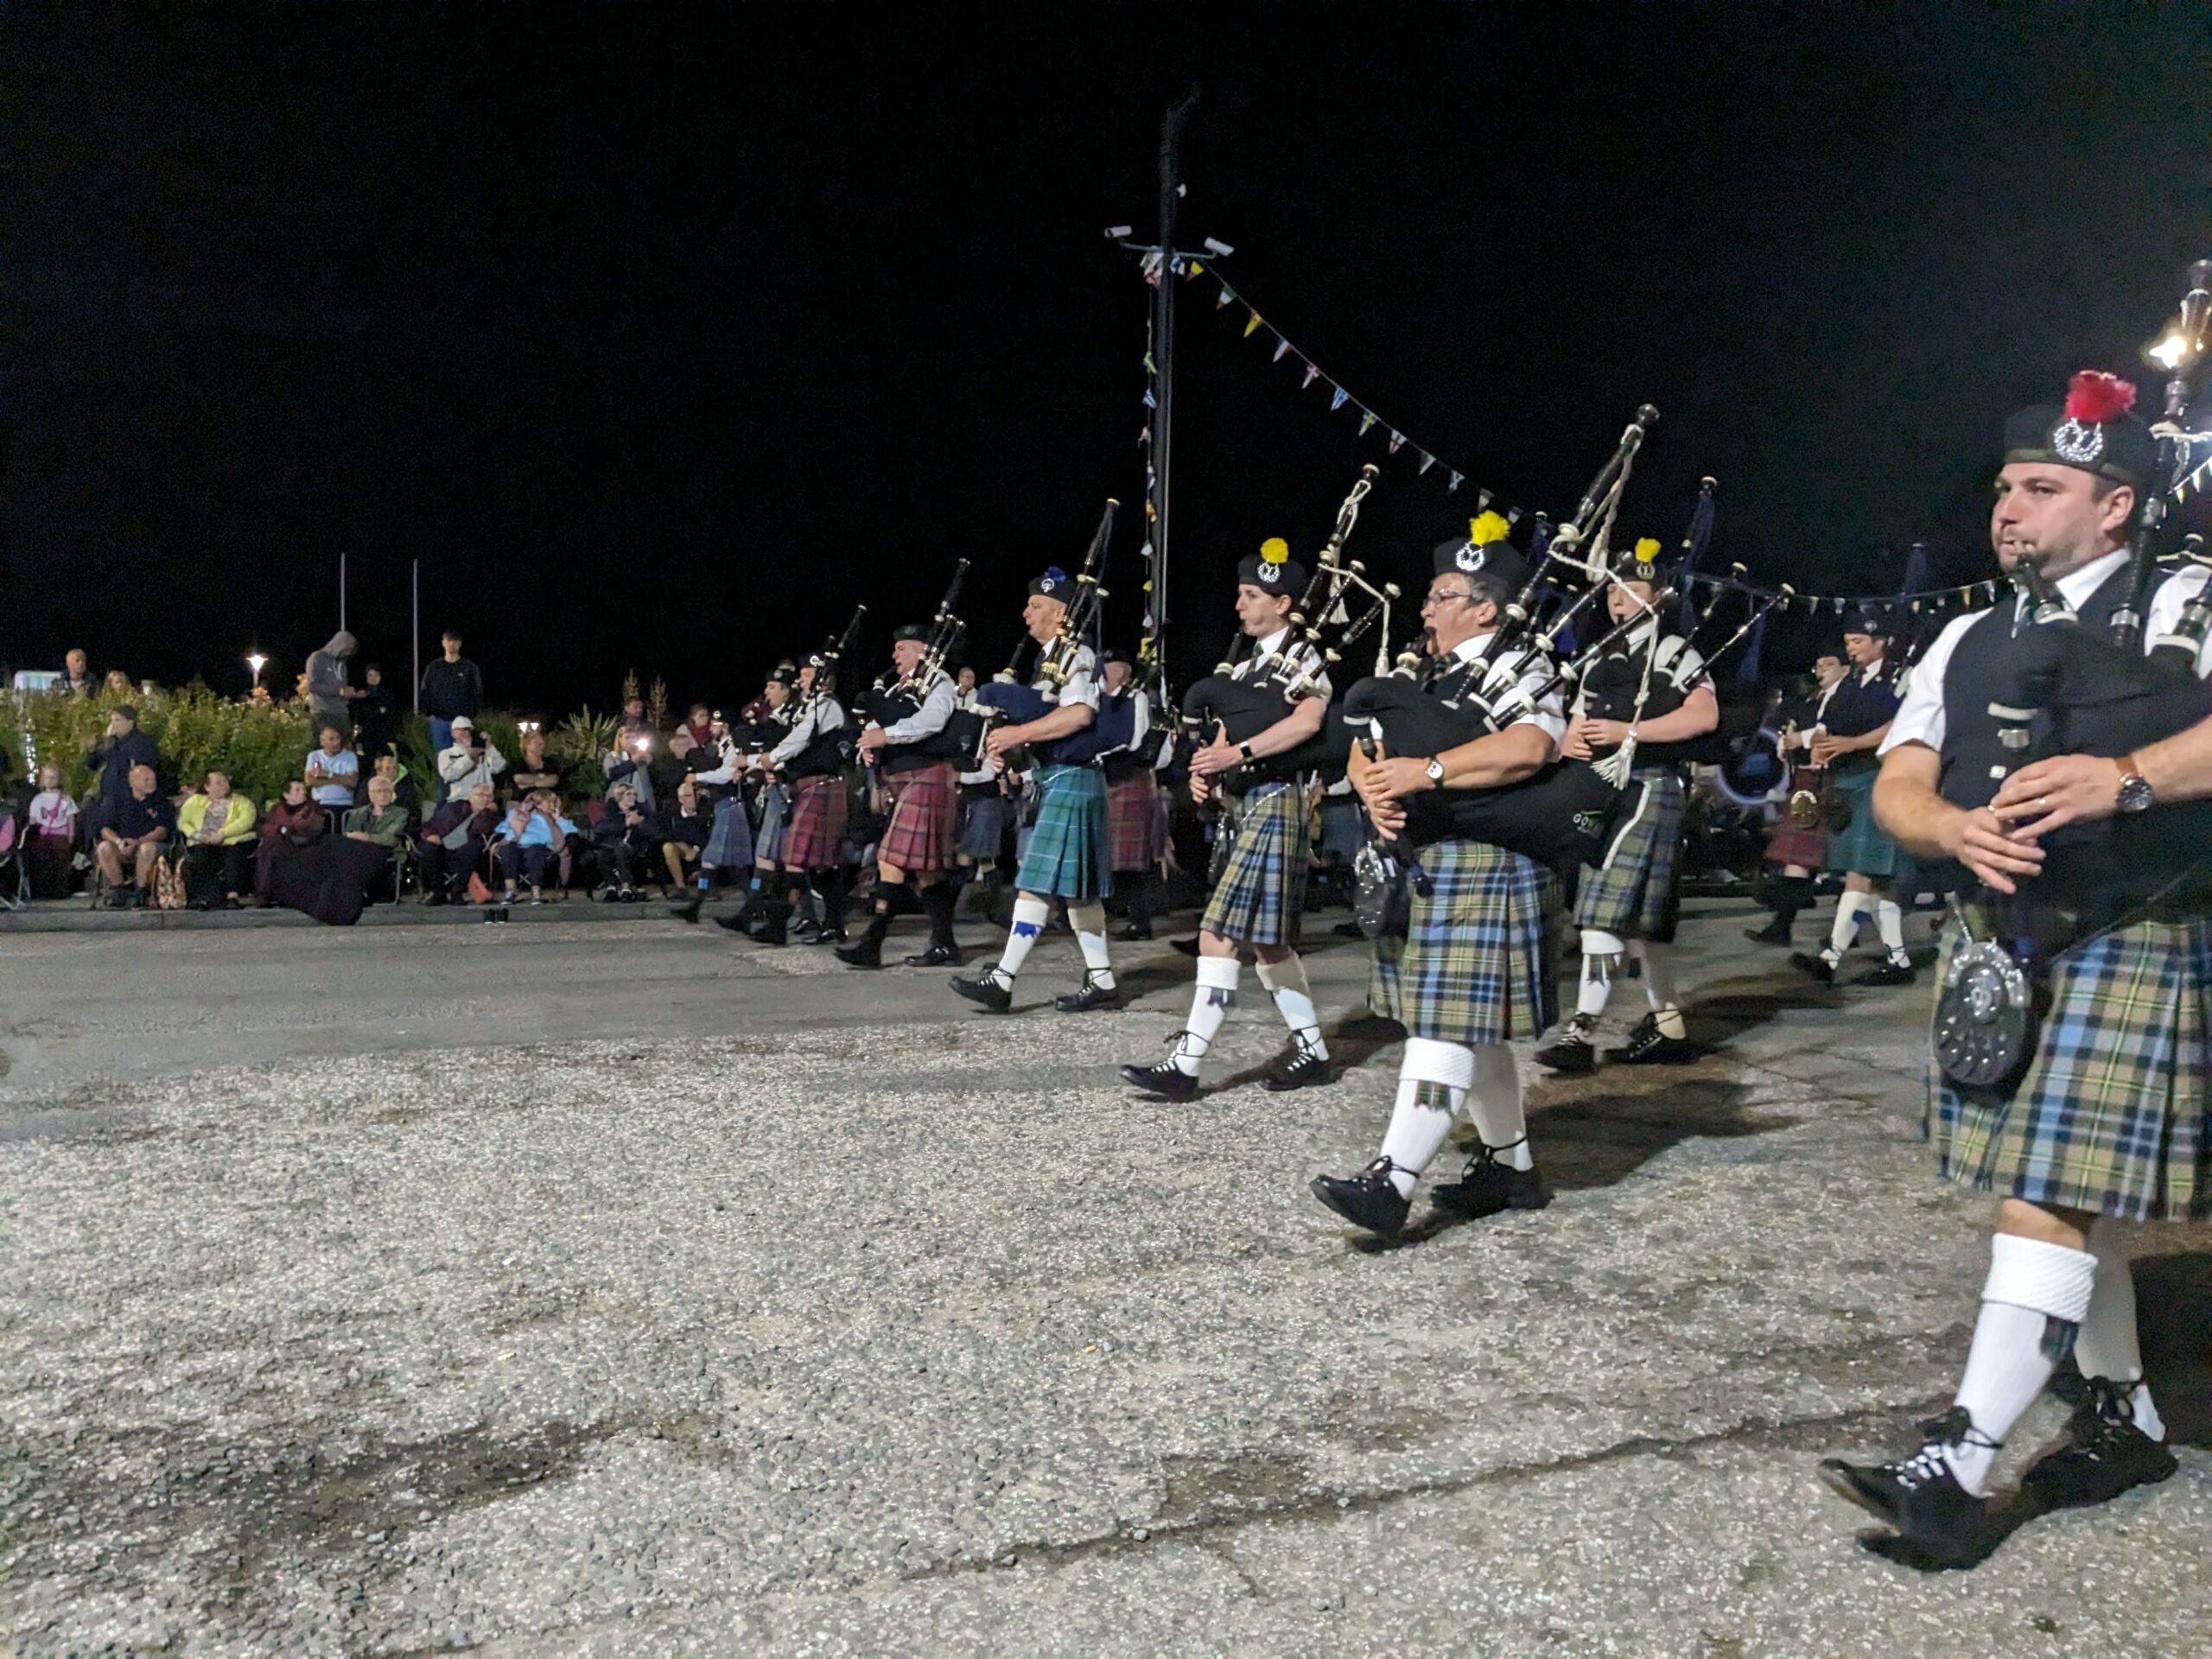 More pipe bands